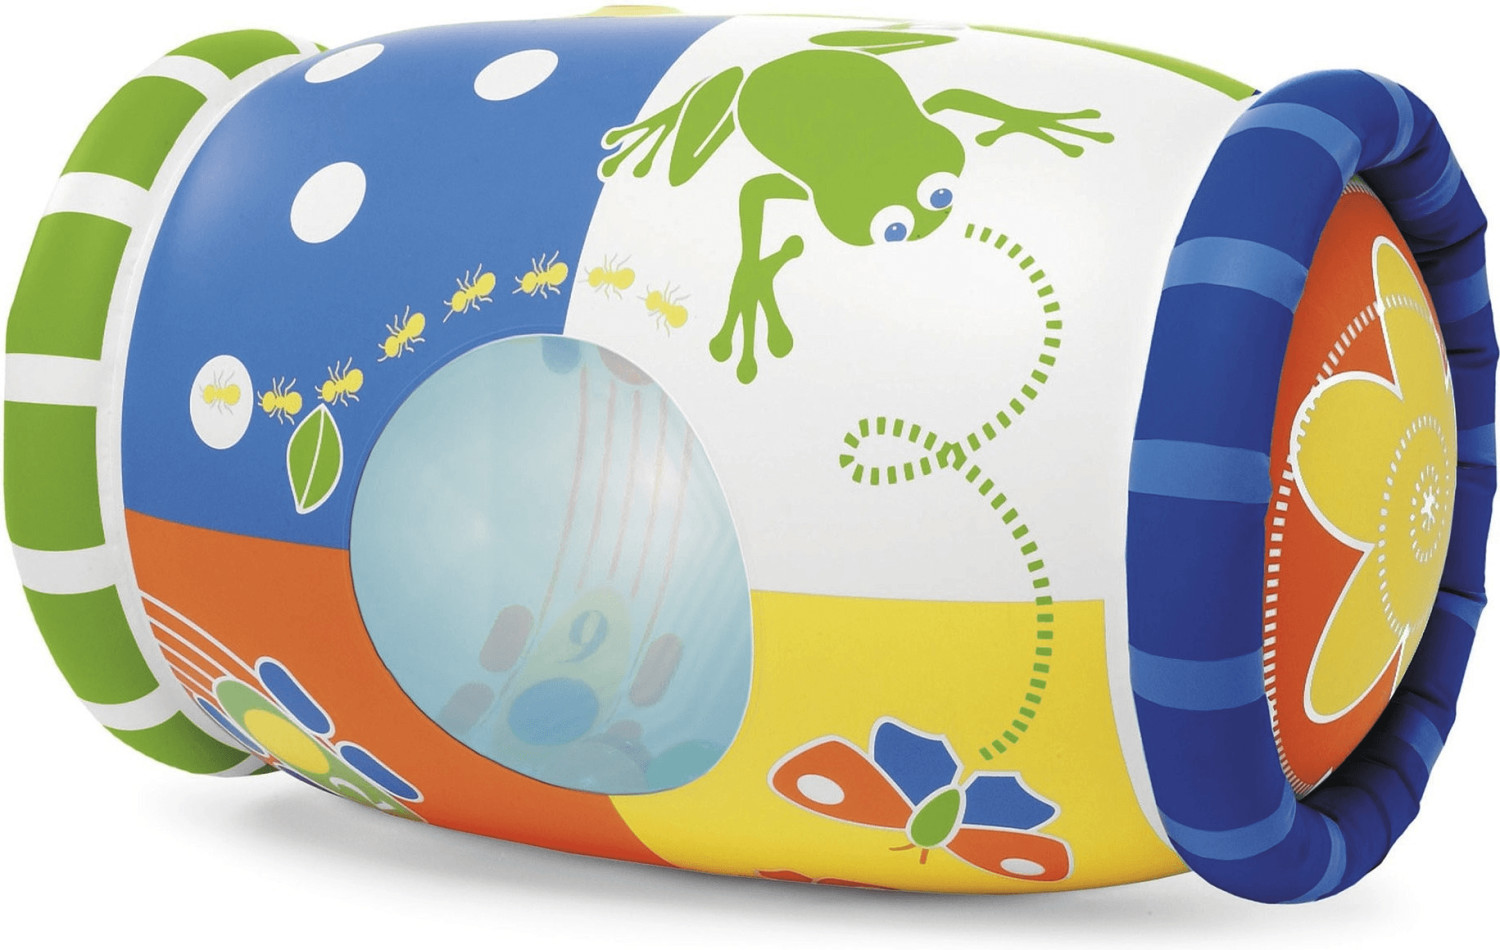 Chicco Musical Roller